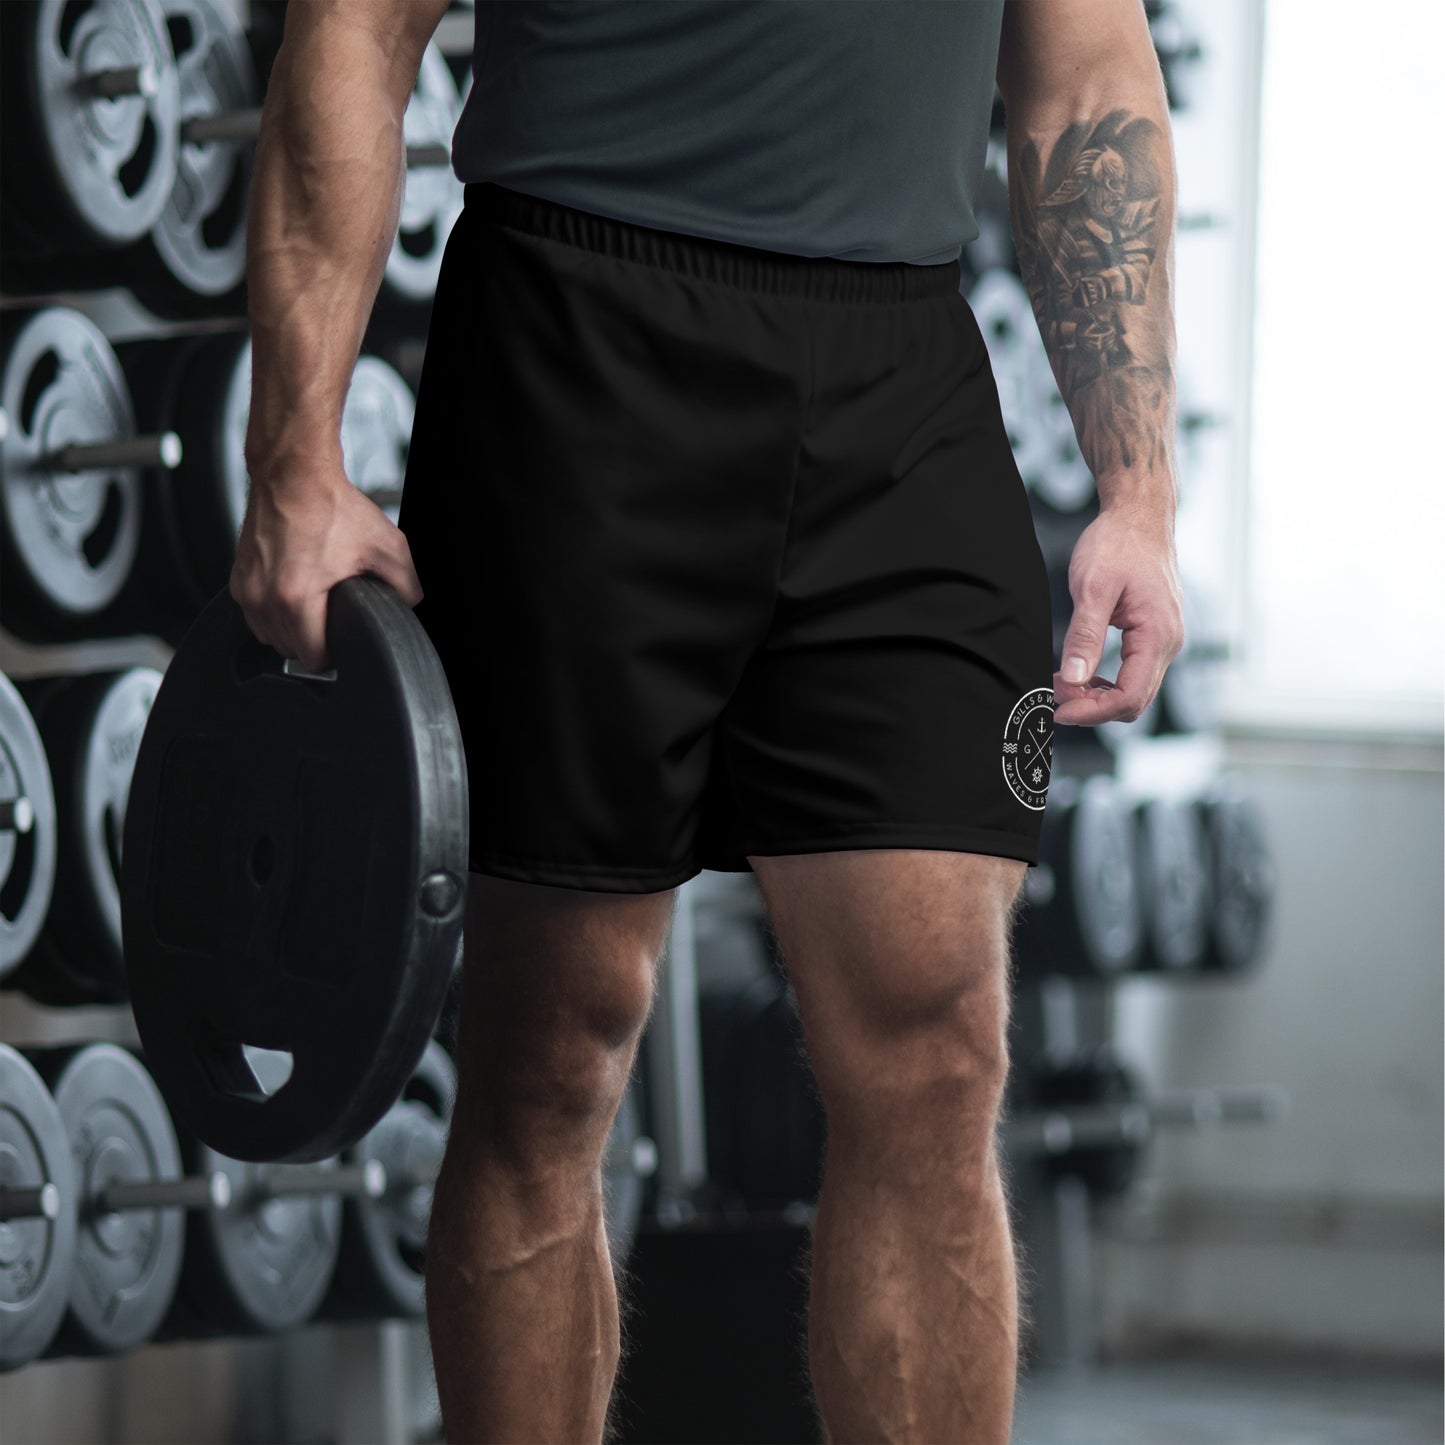 HydroFlex: Gills and Water Men's Black Athletic Shorts